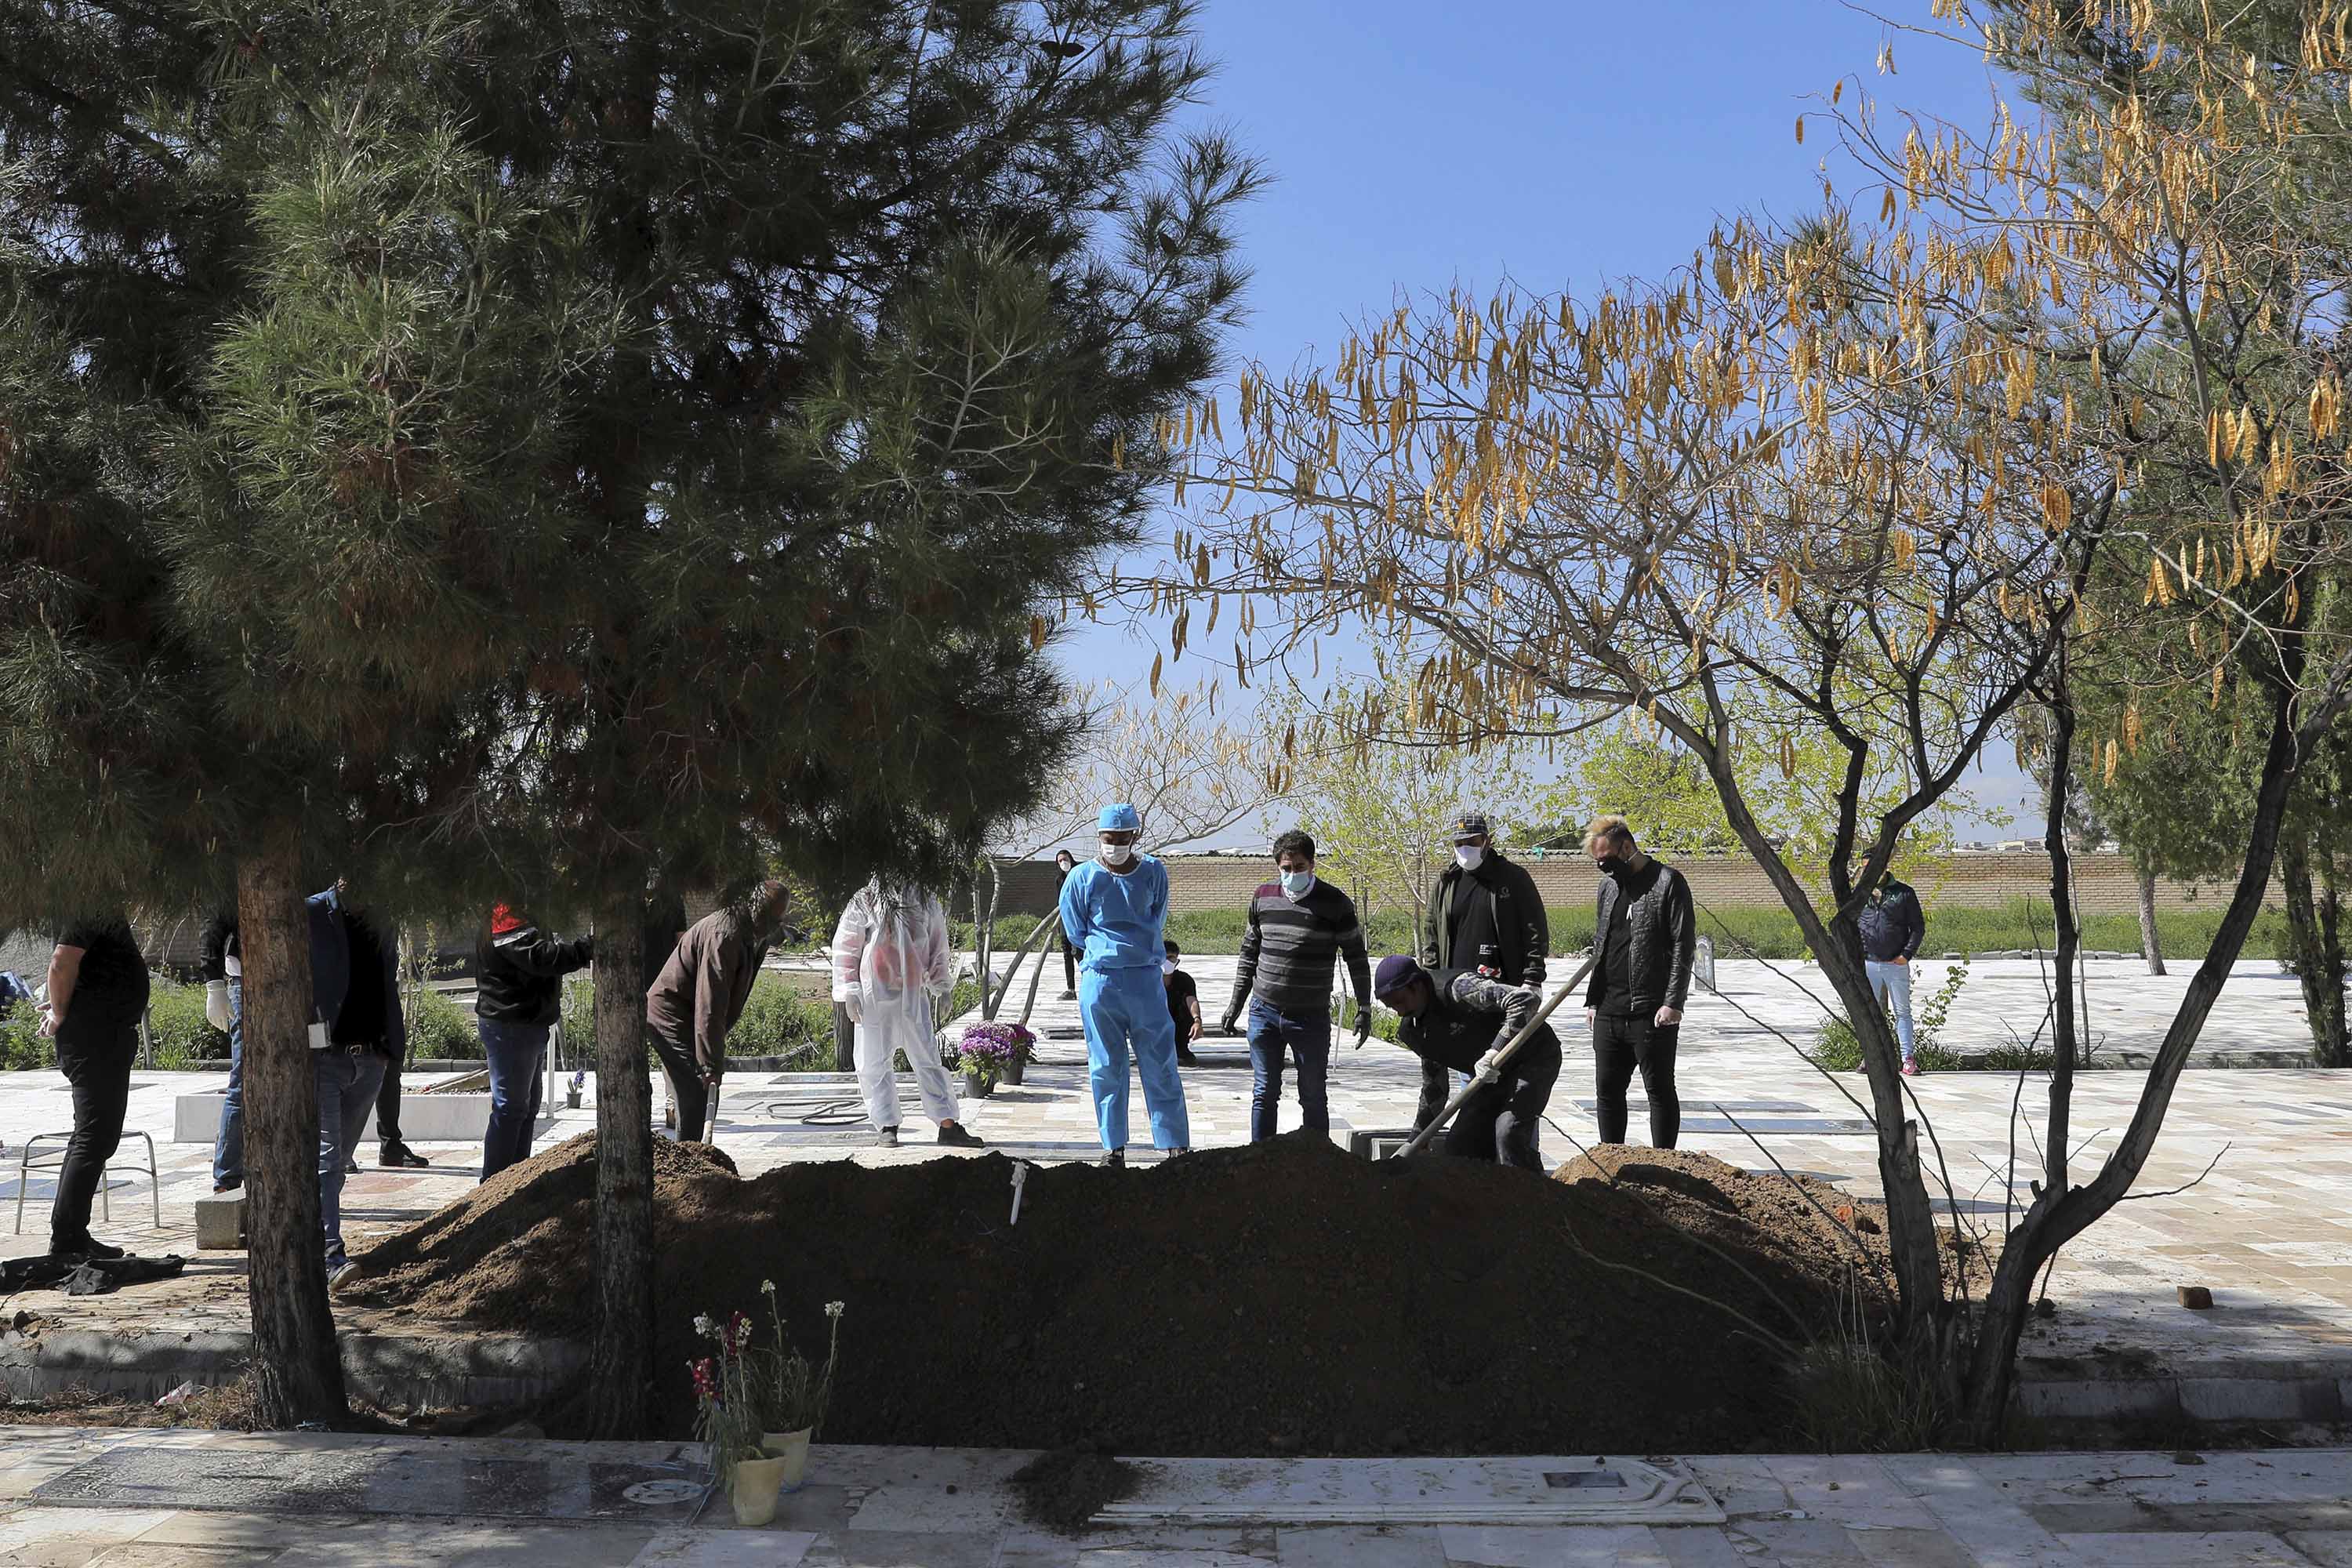 People attend a funeral for a coronavirus victim at a cemetery outside Tehran, Iran, on March 30.